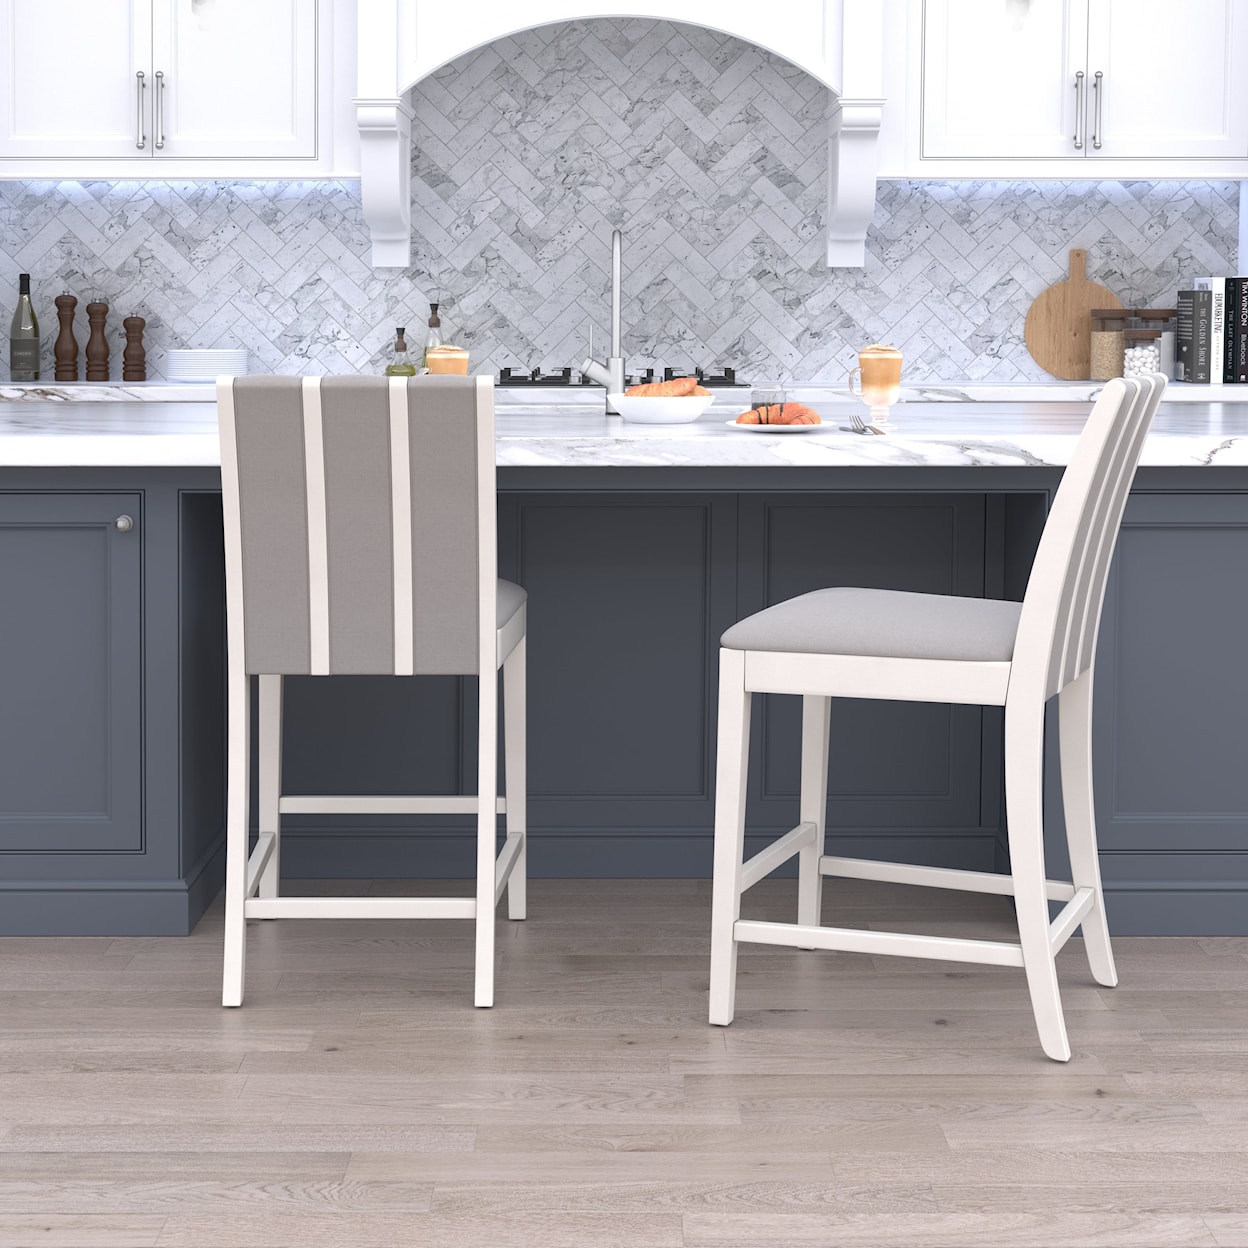 Hillsdale Iris Counter and Bar Stools